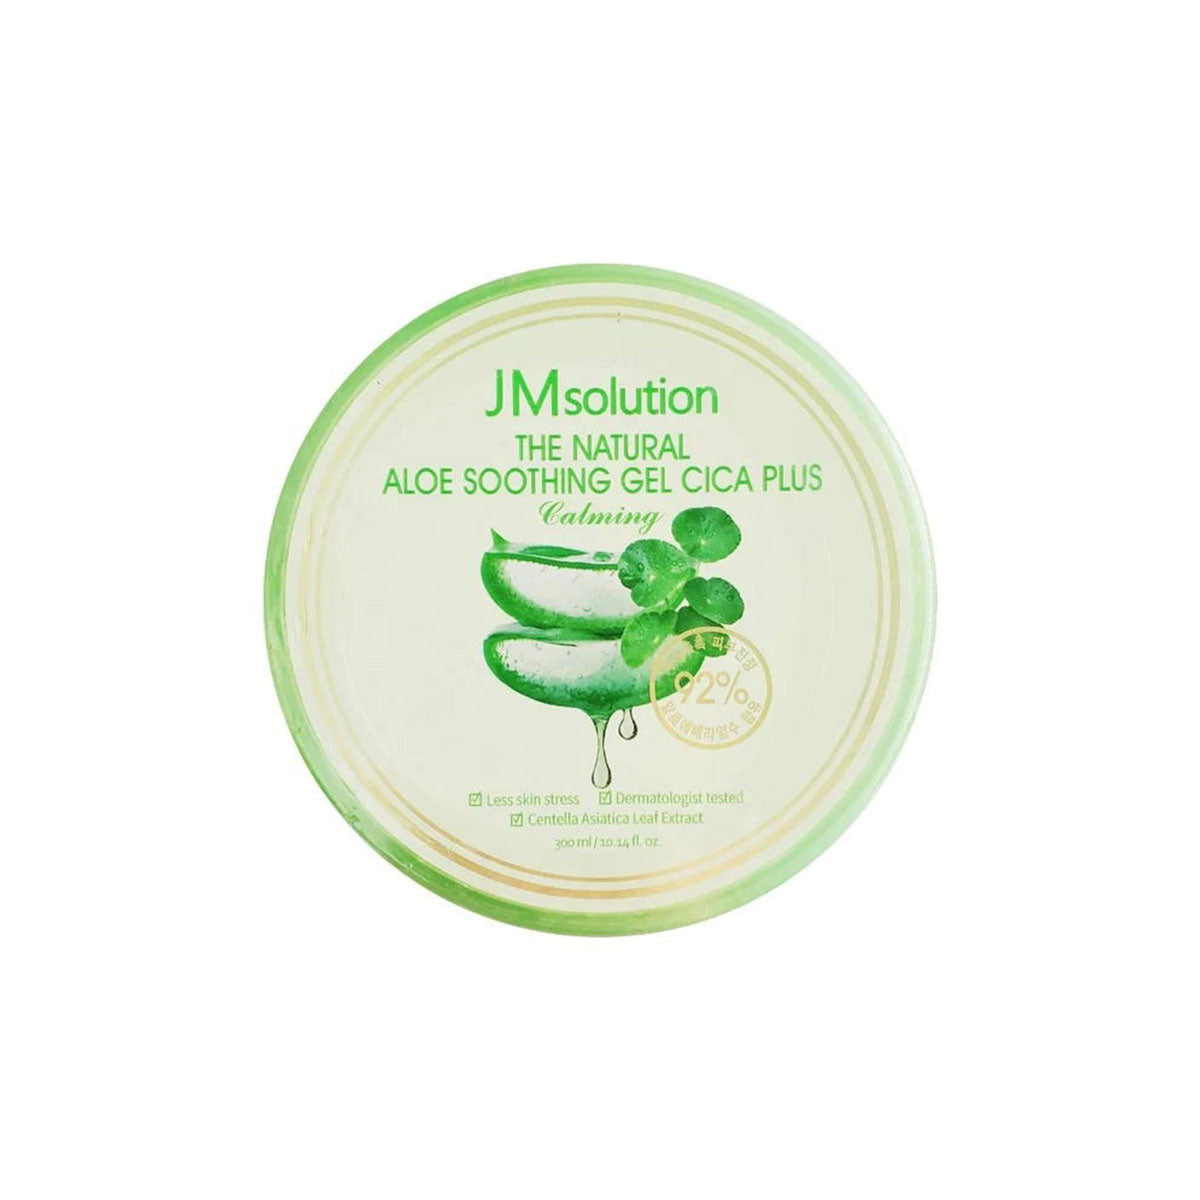 JM Solution The Natural Aloe Soothing Gel Cica Plus Calming 300ml